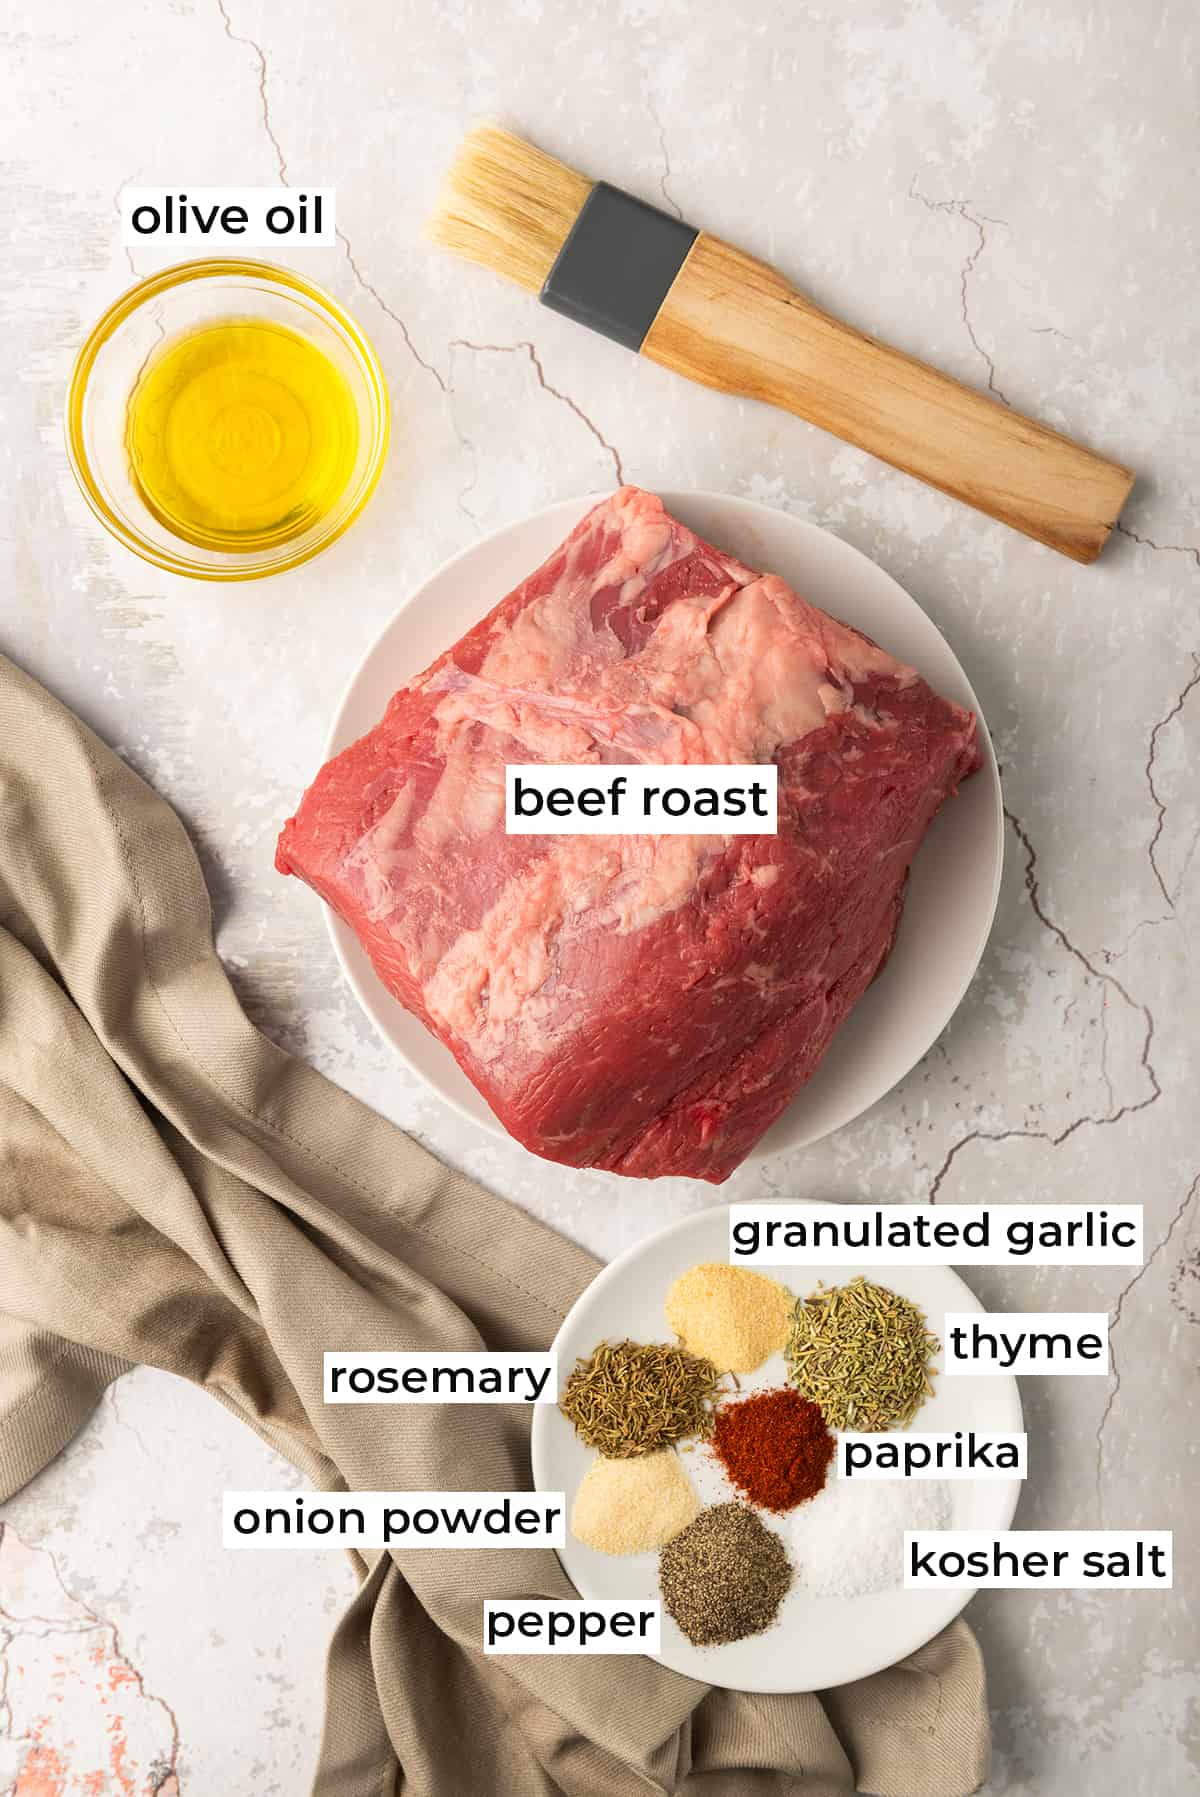 All the ingredients needed to make Deli Style Roast Beef with text overlay.